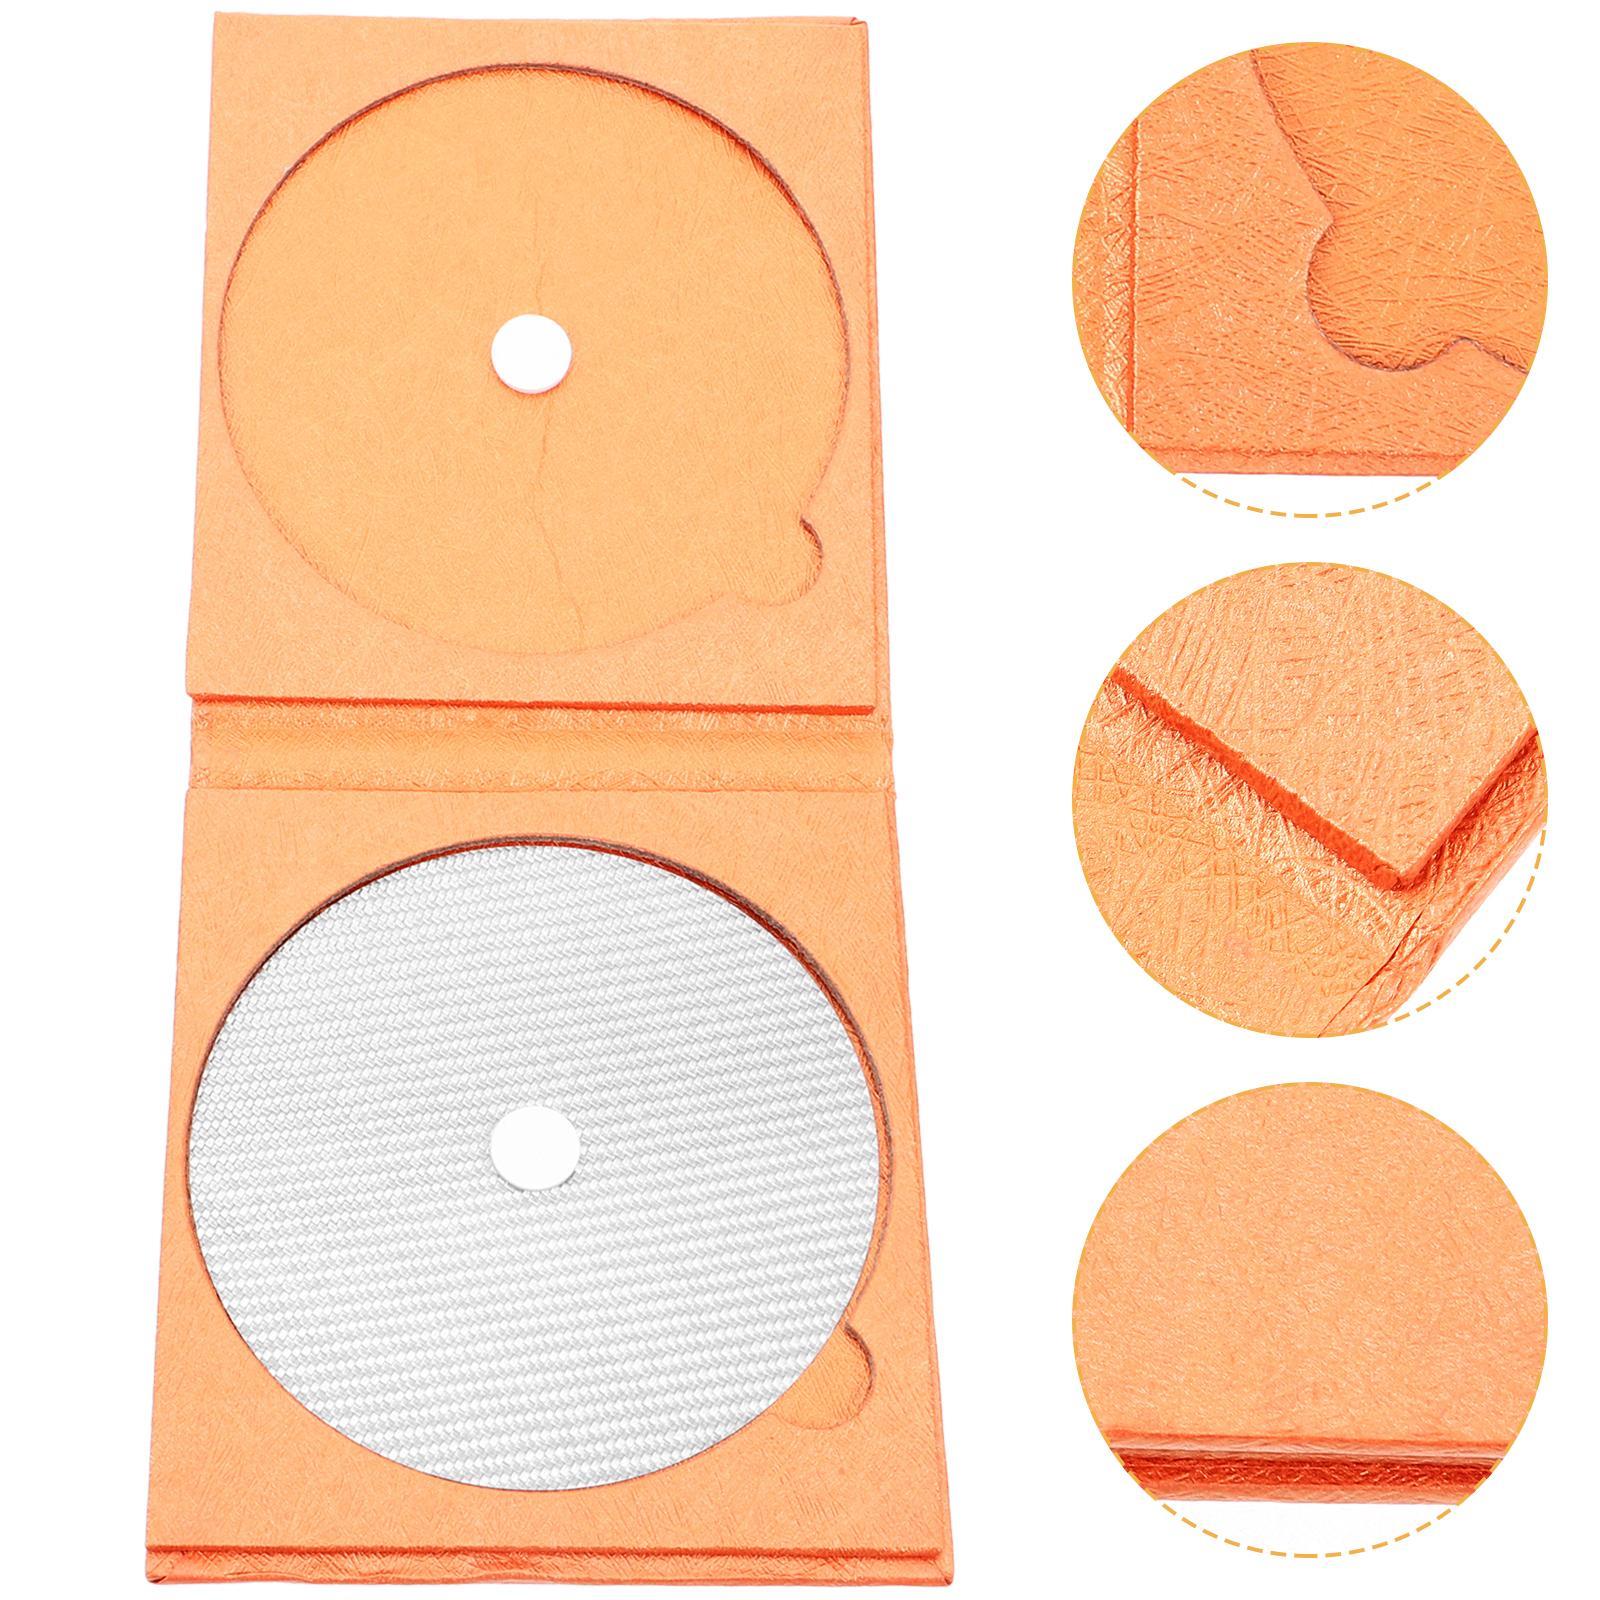 Tuning Pad CDs Carbon Fiber CD Tuning Pad Accessories Stabilizer CD Player CD Tuning Pad White